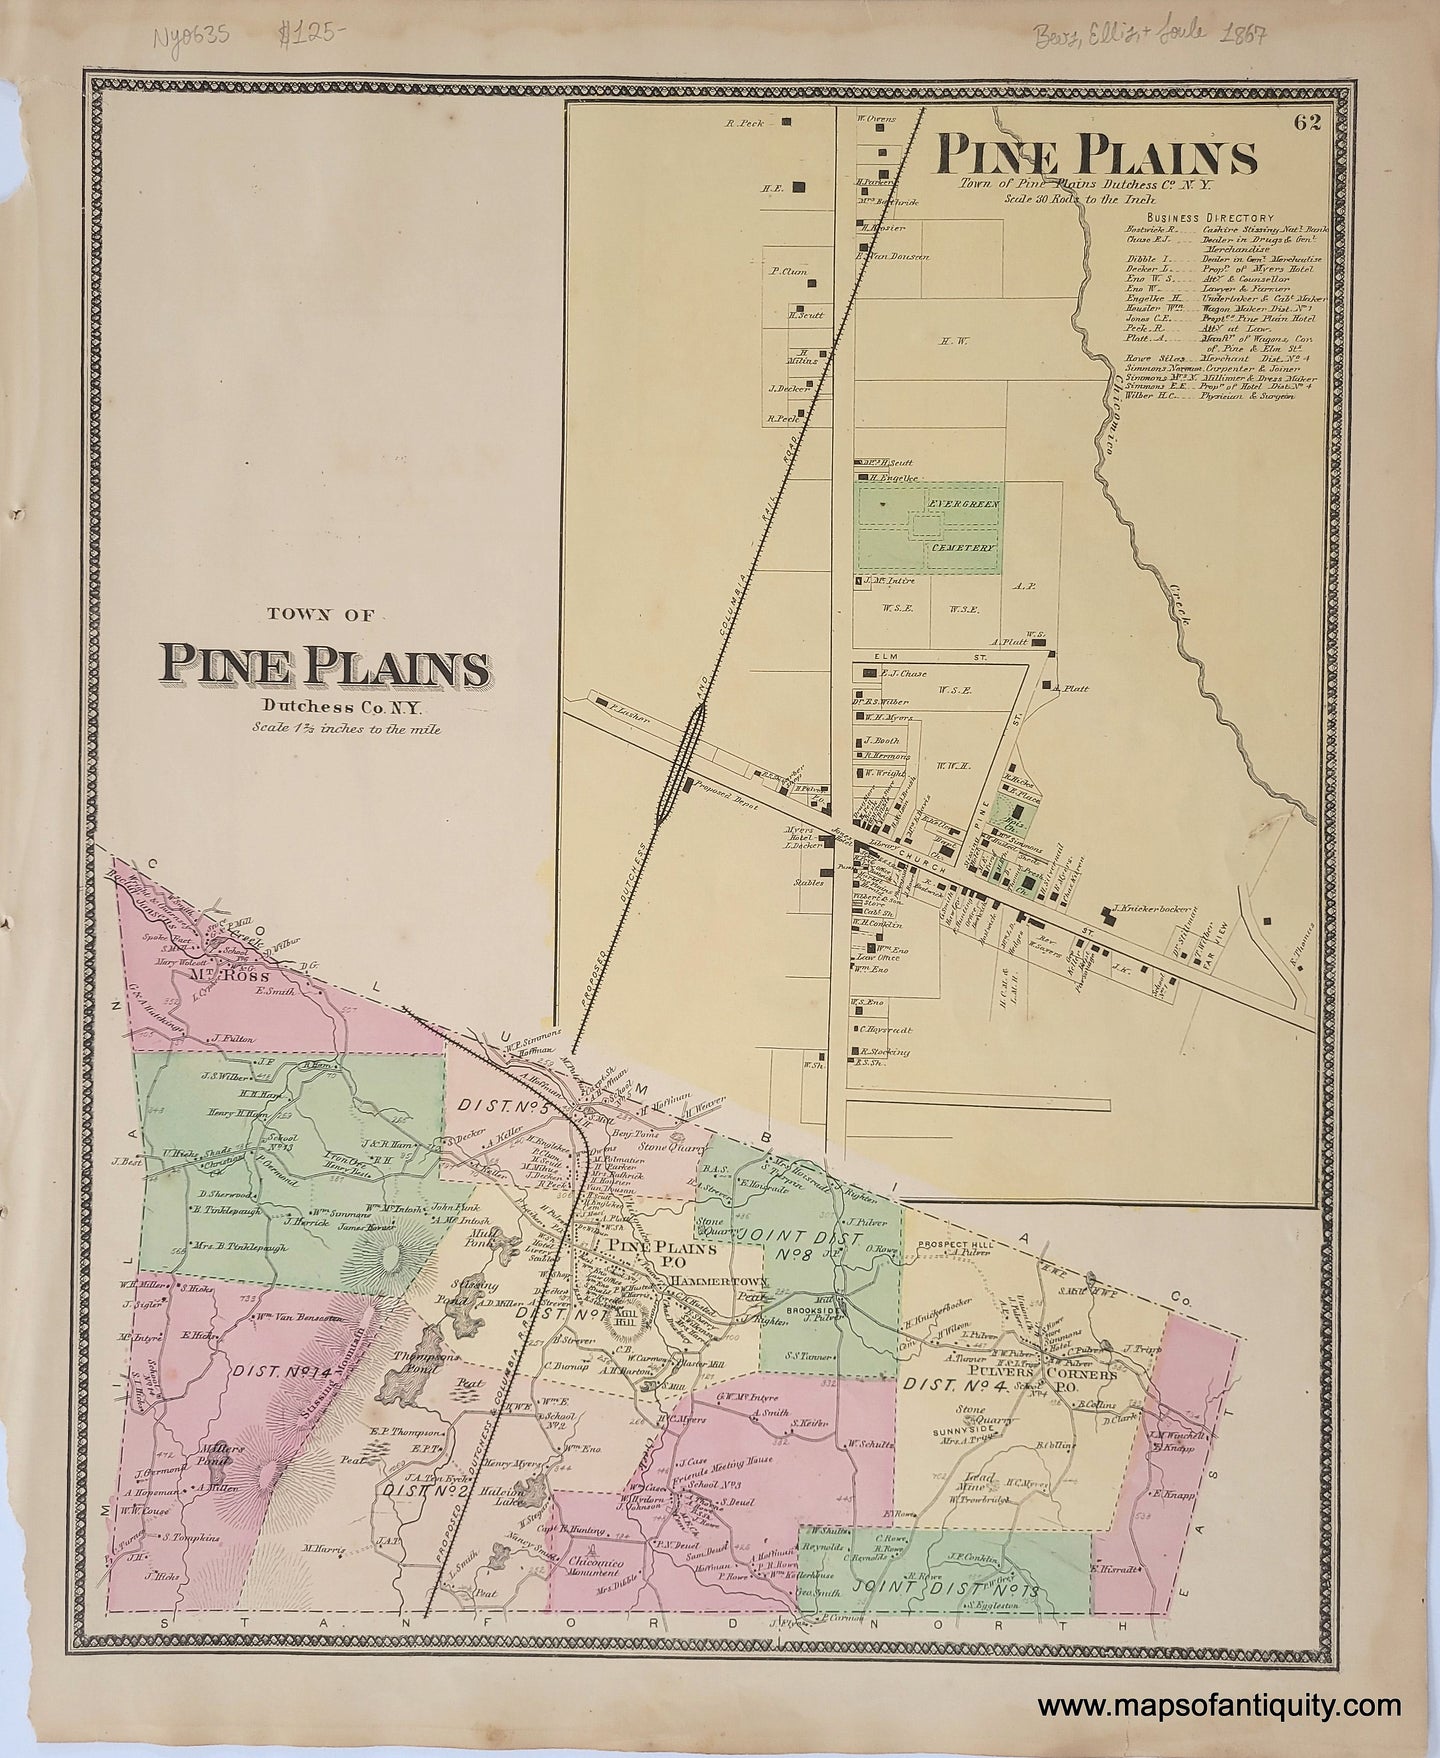 Antique-Hand-Colored-Map-Town-of-Pine-Plains-(NY)-**********-United-States-New-York-1867-Beers-Ellis-and-Soule-Maps-Of-Antiquity